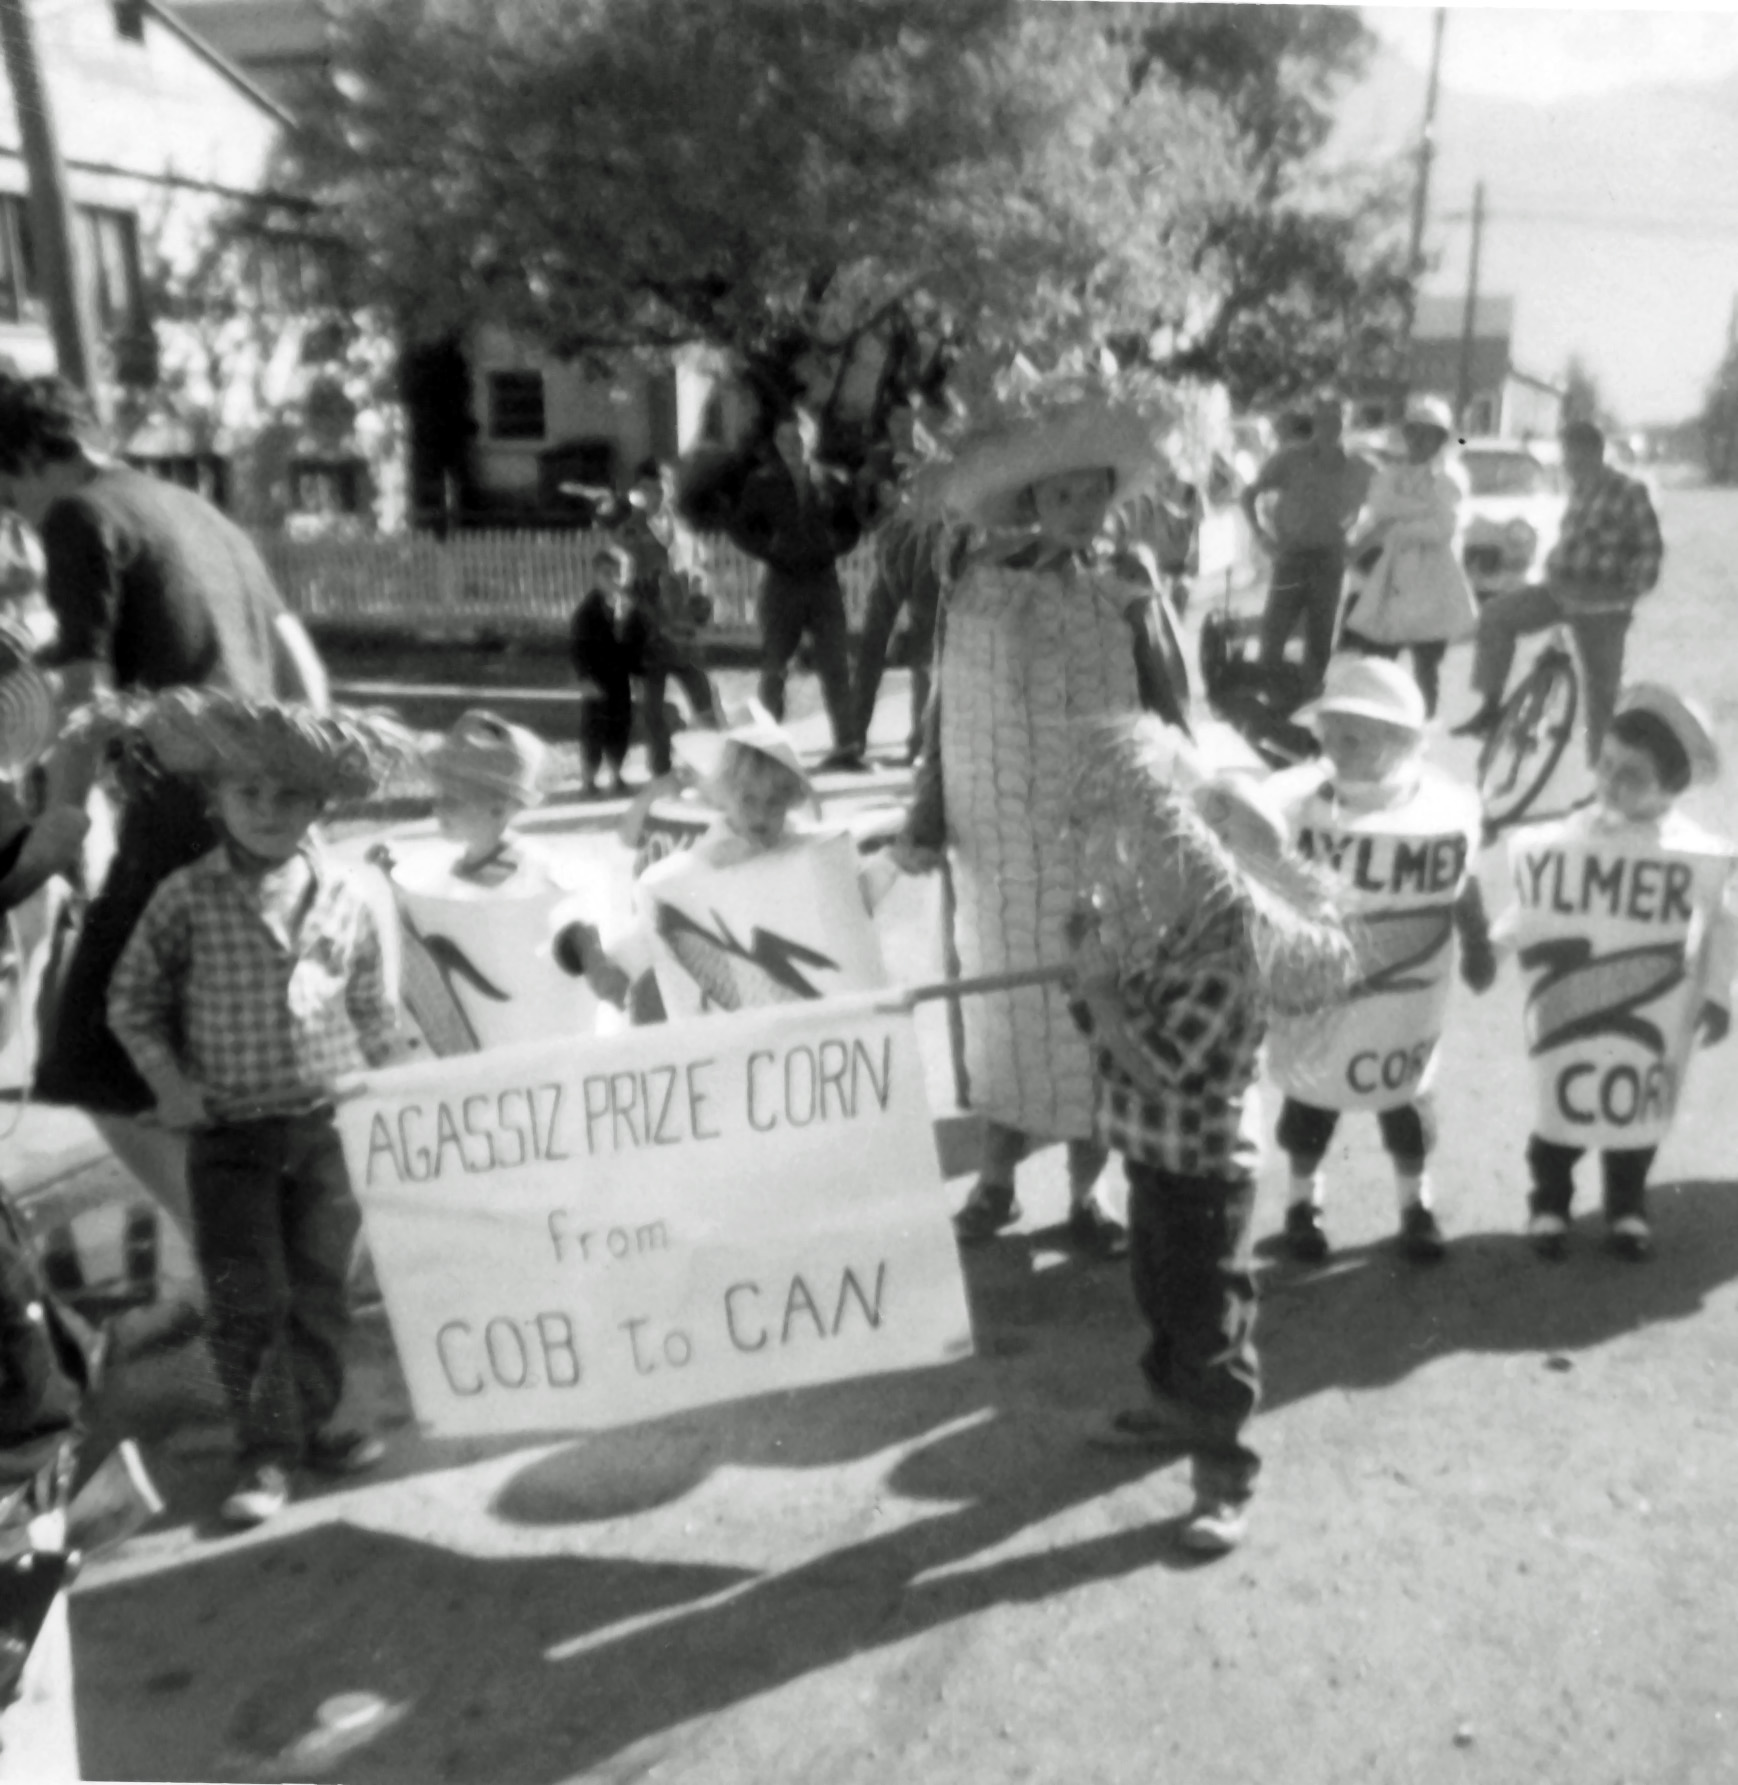 Black and white photograph of children in a parade dressed in corn cob and corn can costumes. Two children are holding a sign "Agassiz Prize Corn from Cob to Can."